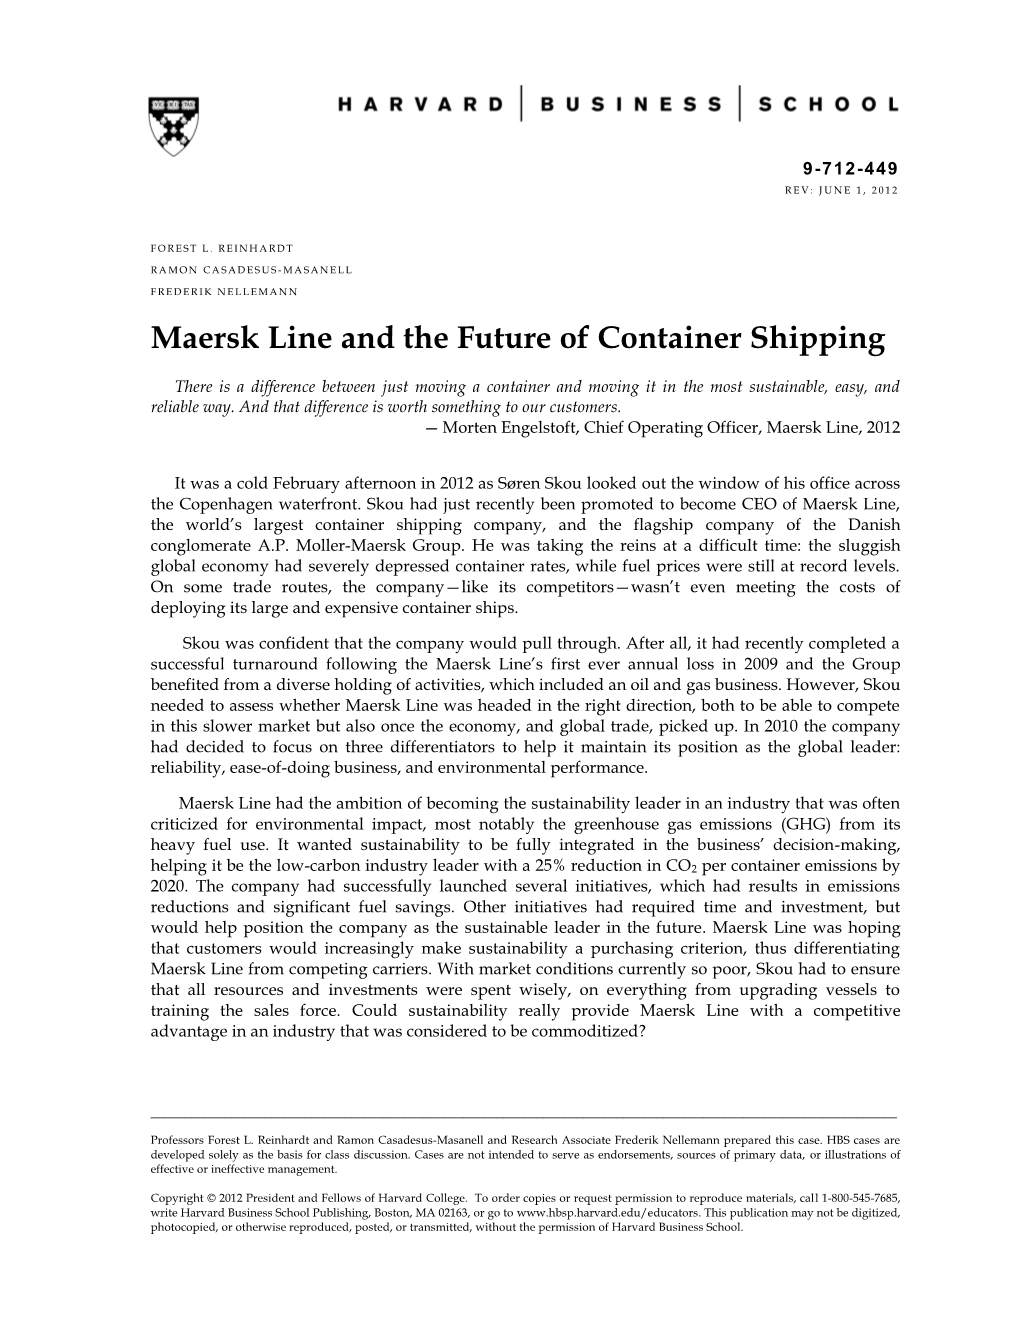 Maersk Line and the Future of Container Shipping